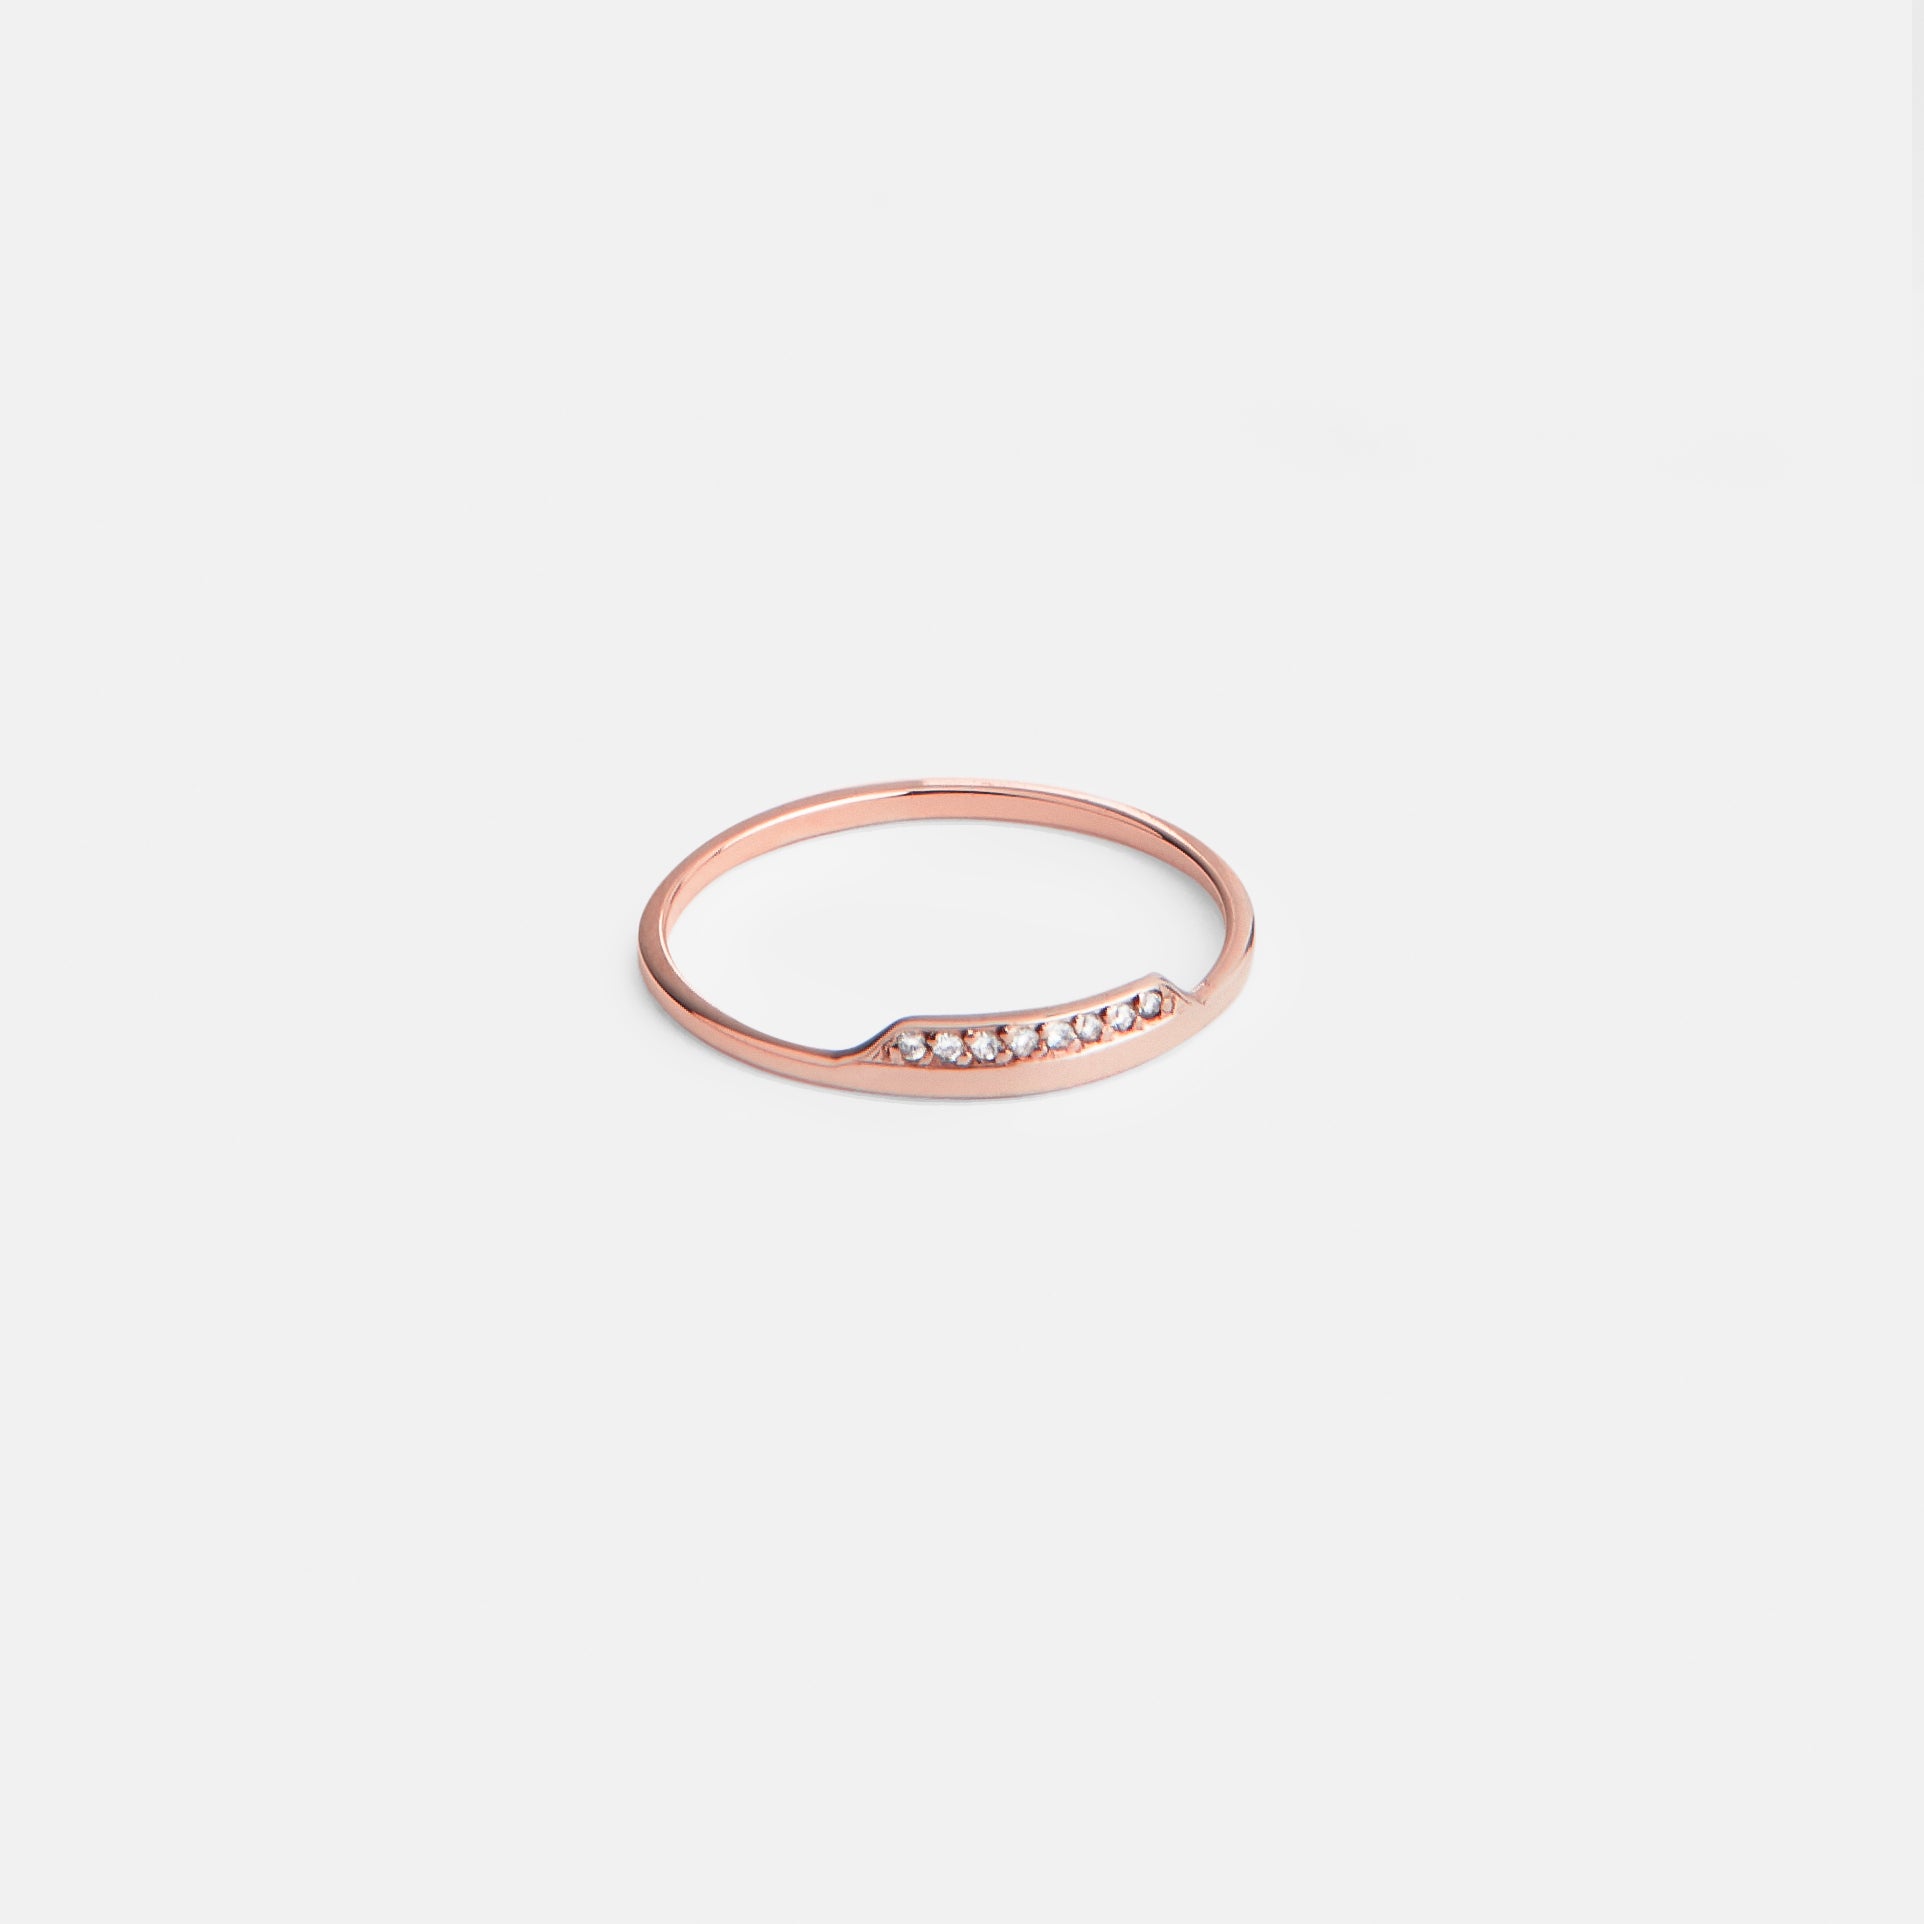 Salo Thin Ring in 14k Rose Gold set with White Diamonds By SHW Fine Jewelry NYC